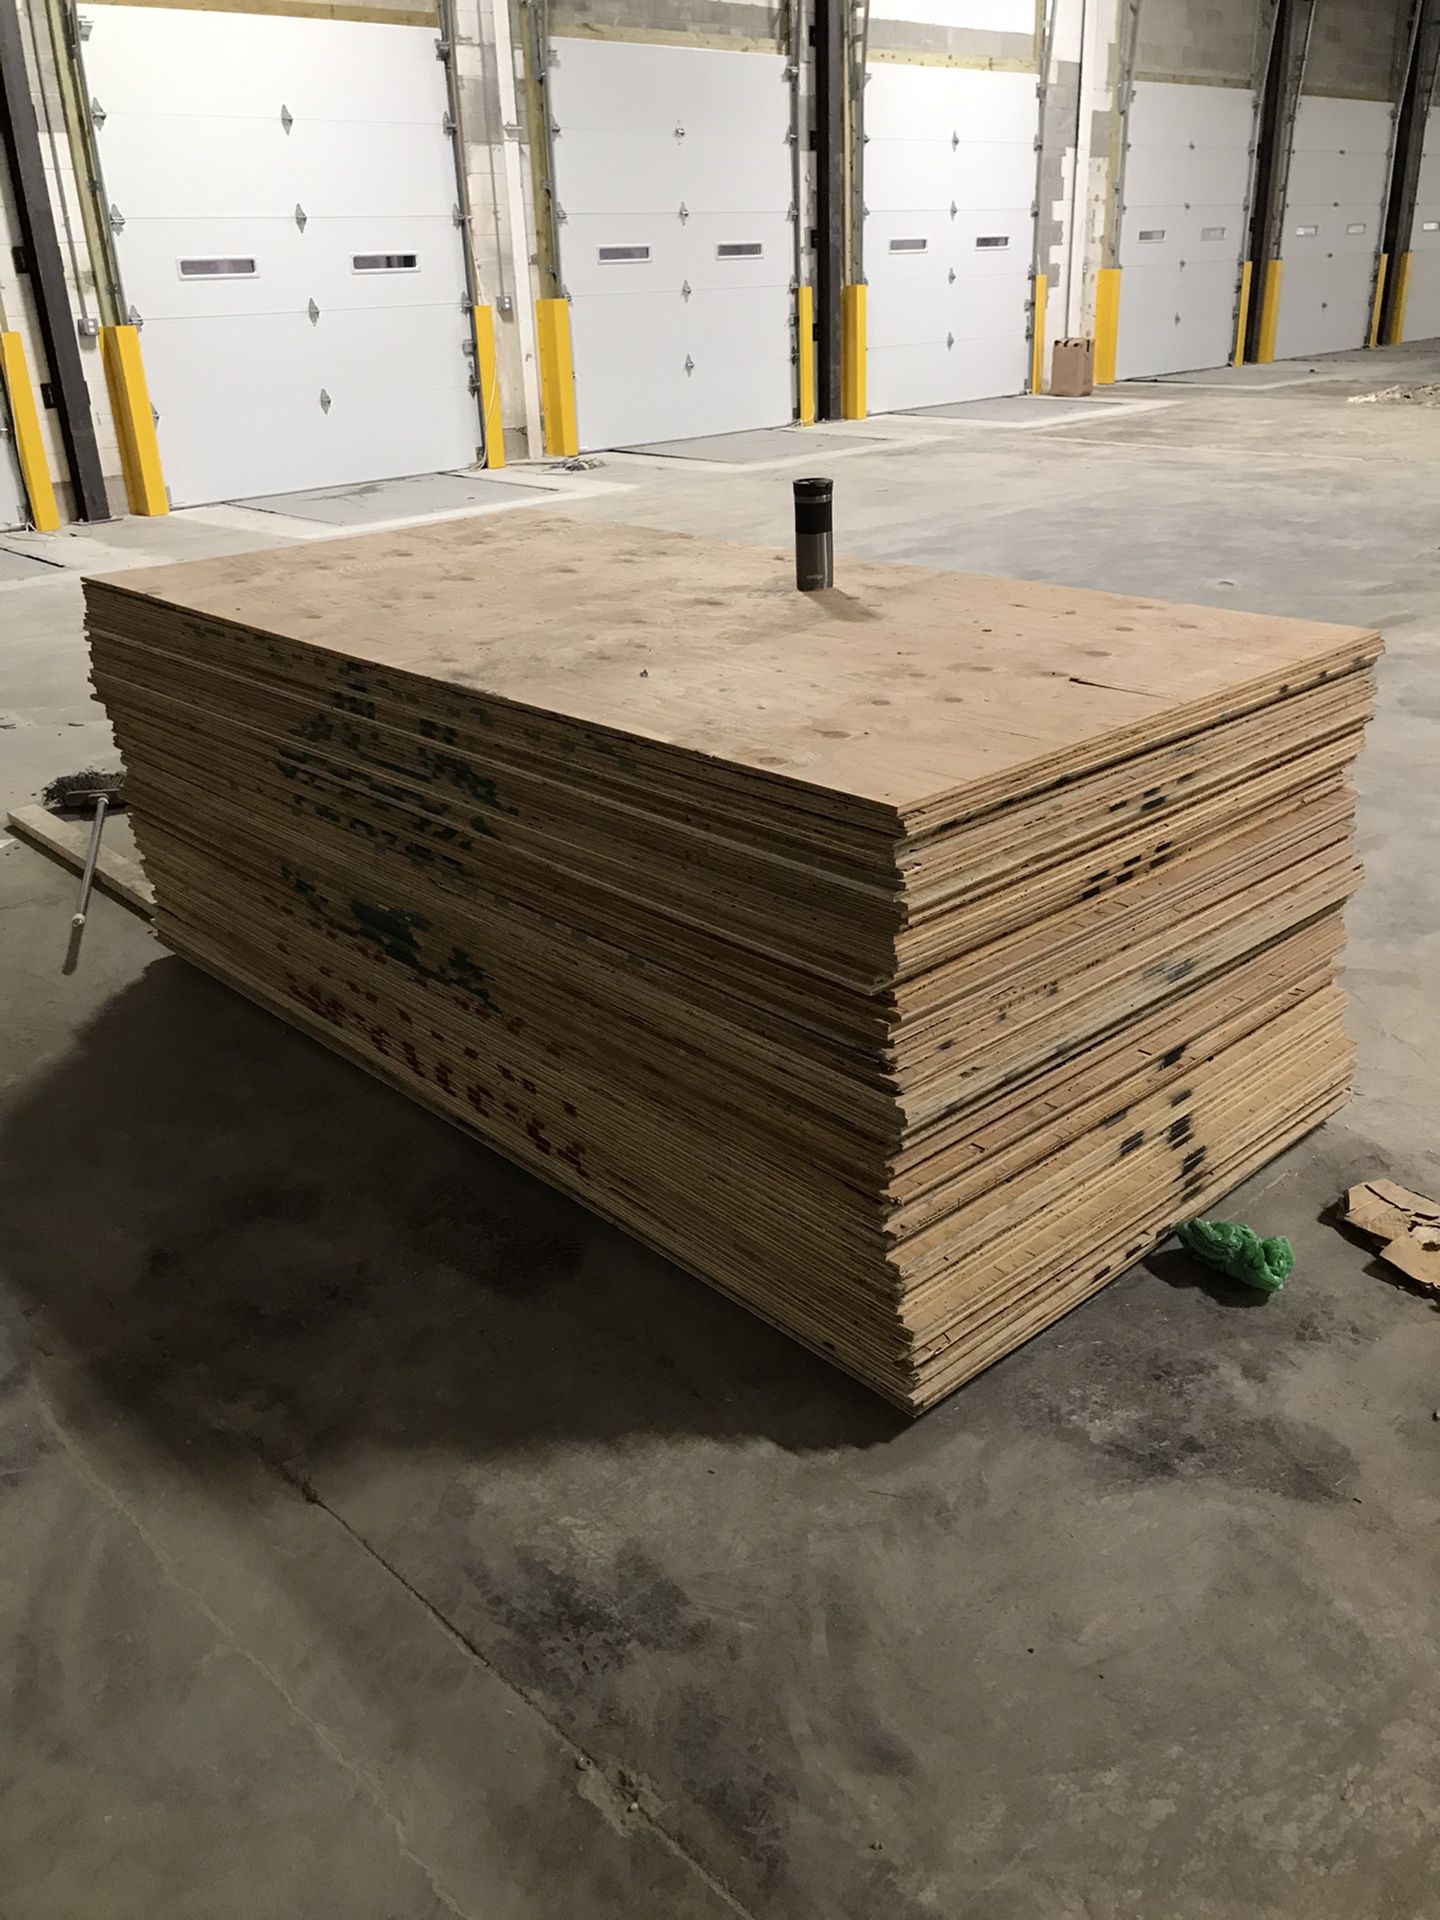 70 sheets of slightly used half-inch plywood